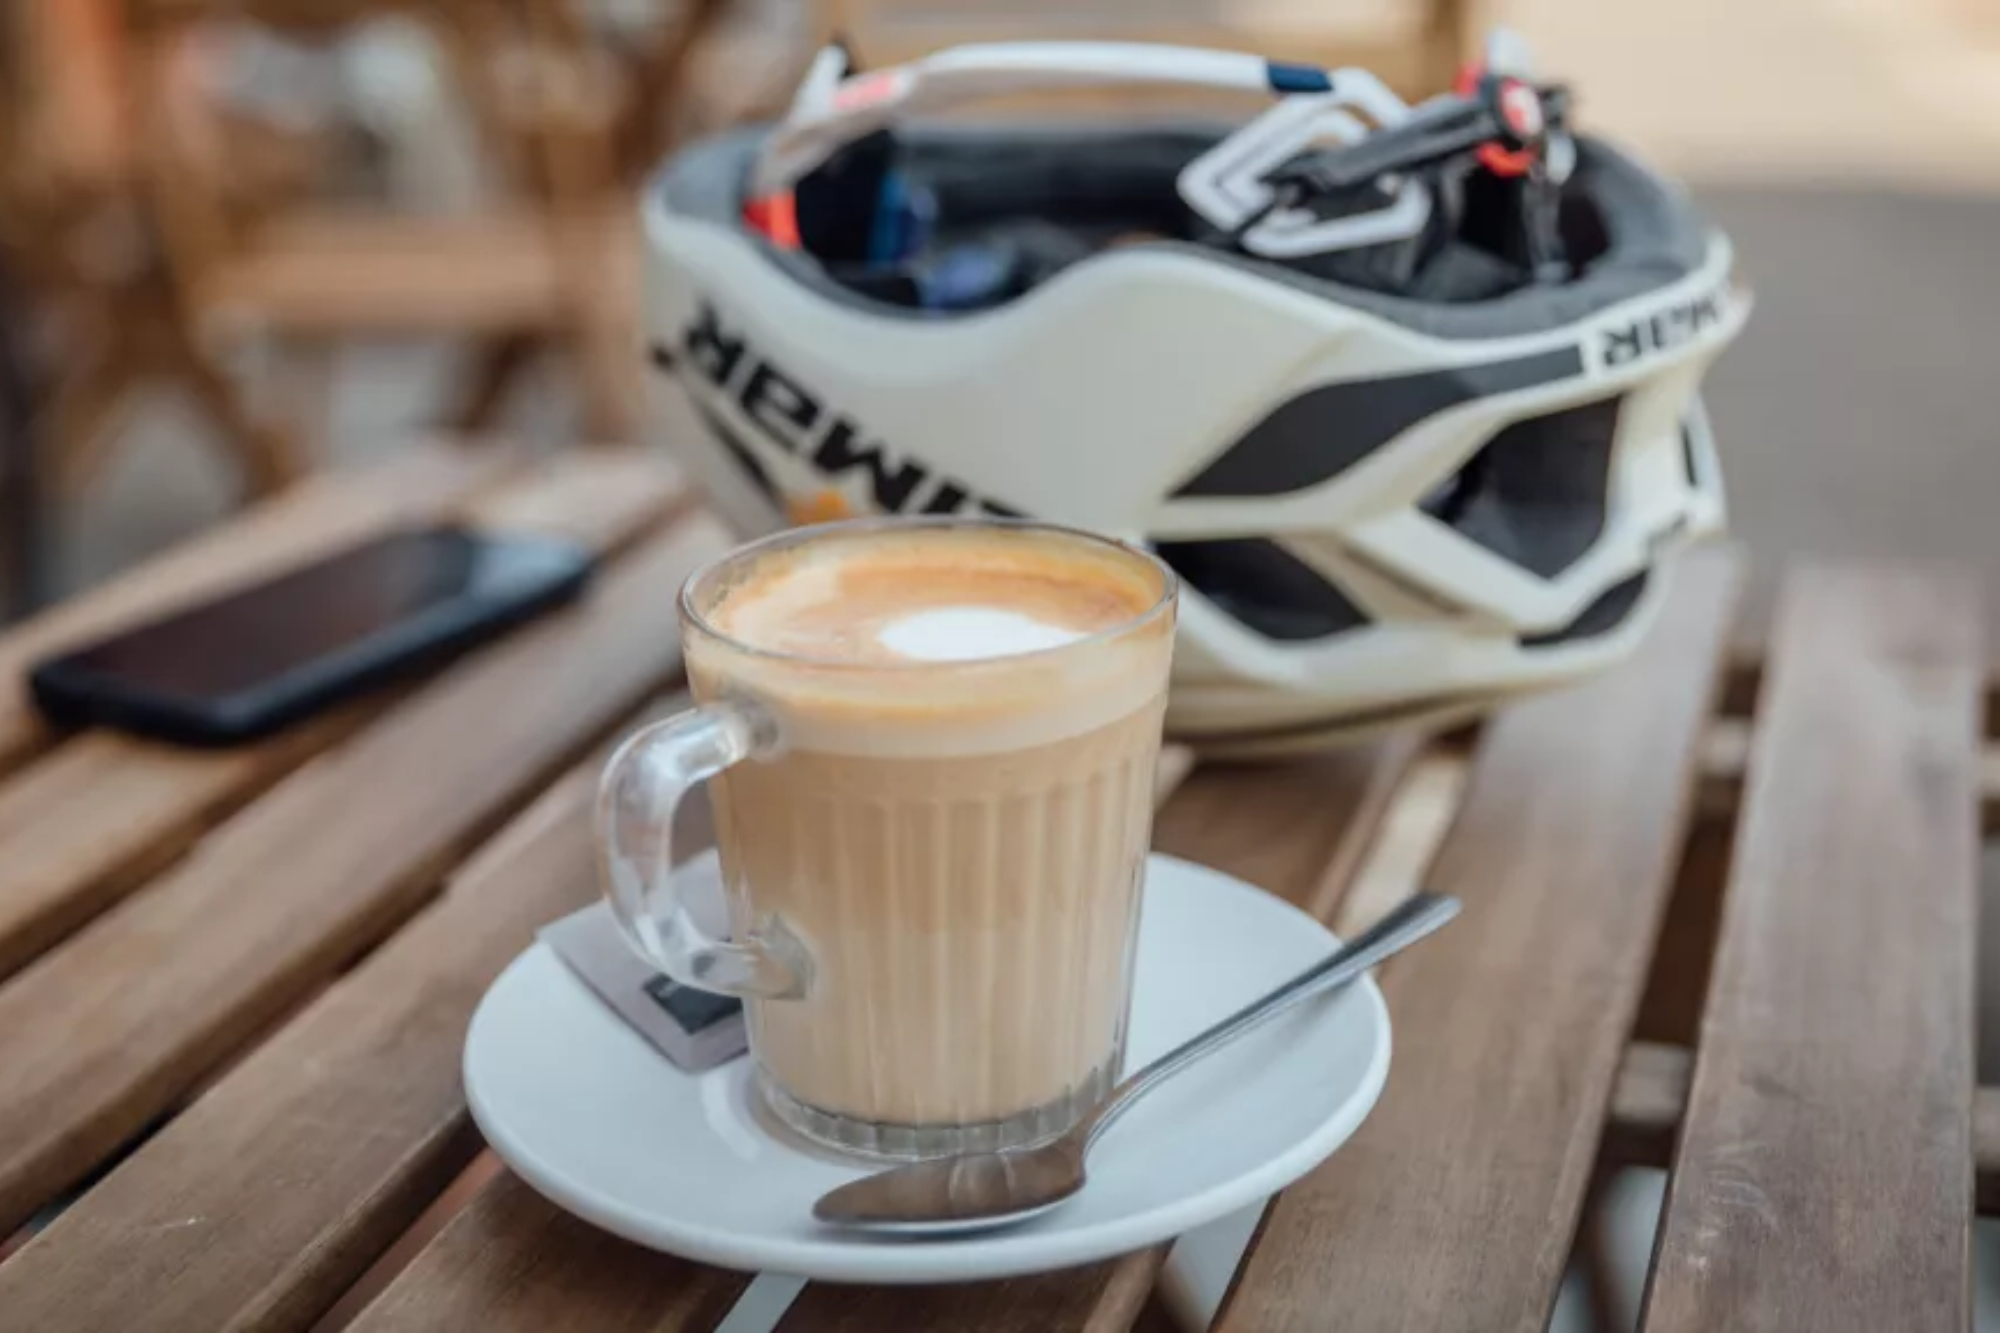 Image shows a cycling coffee stop.